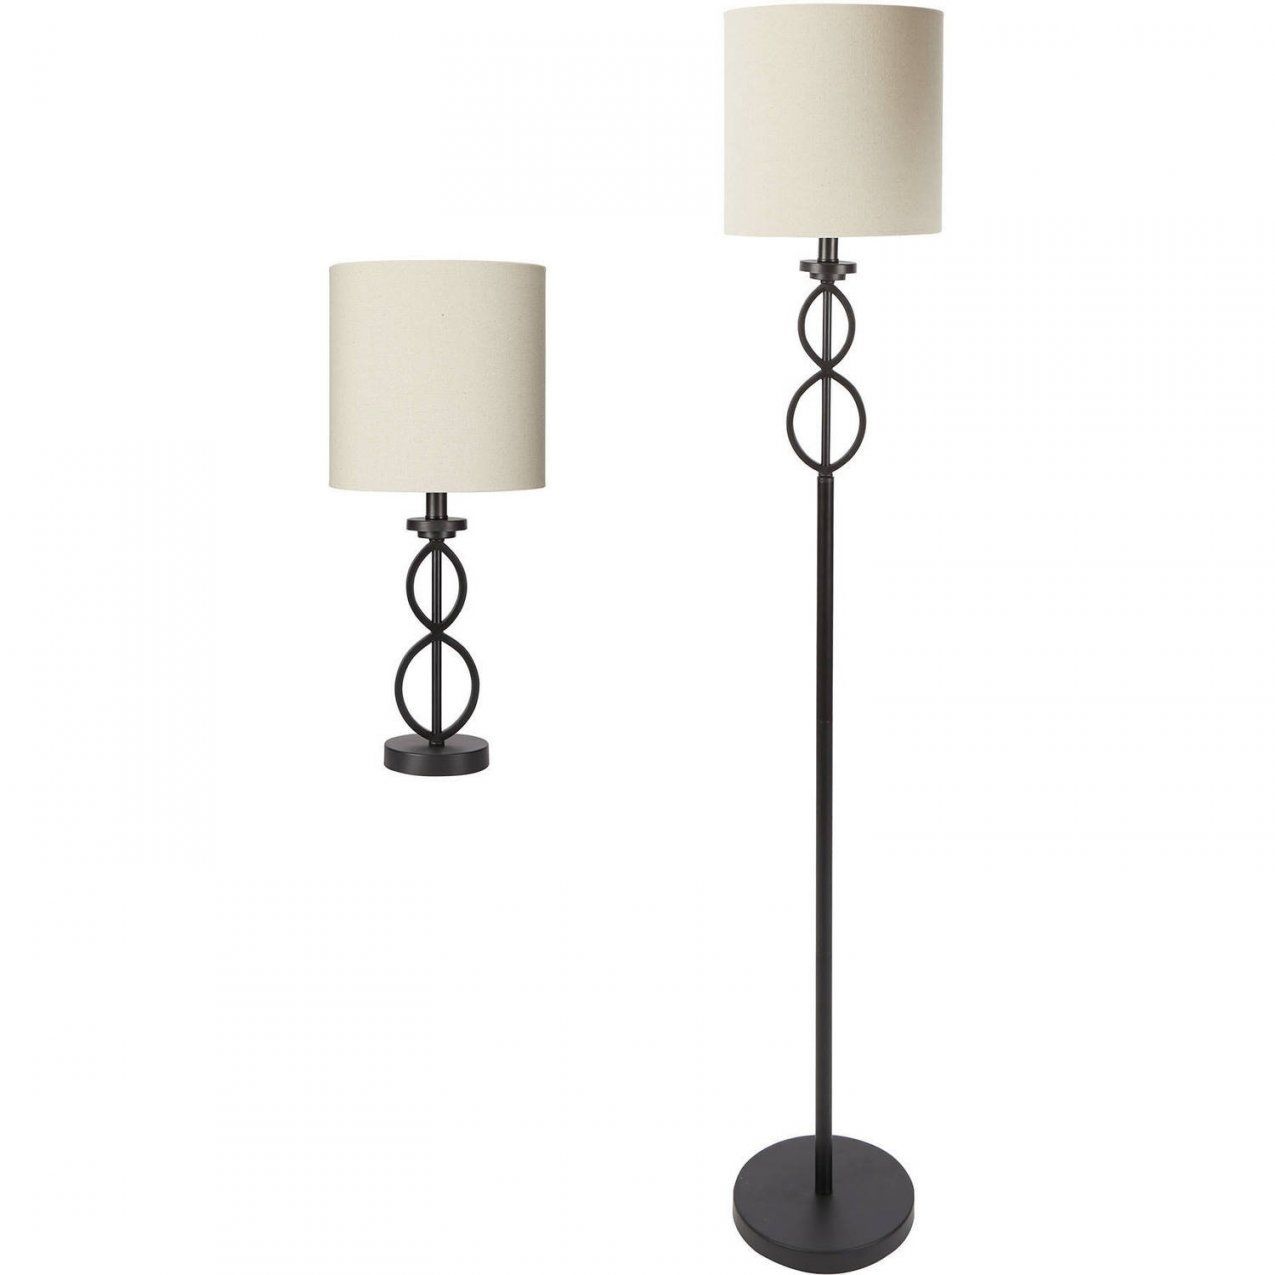 Living Room Table Lamps Sets Inside Living Room Table Lamps Sets (View 12 of 15)